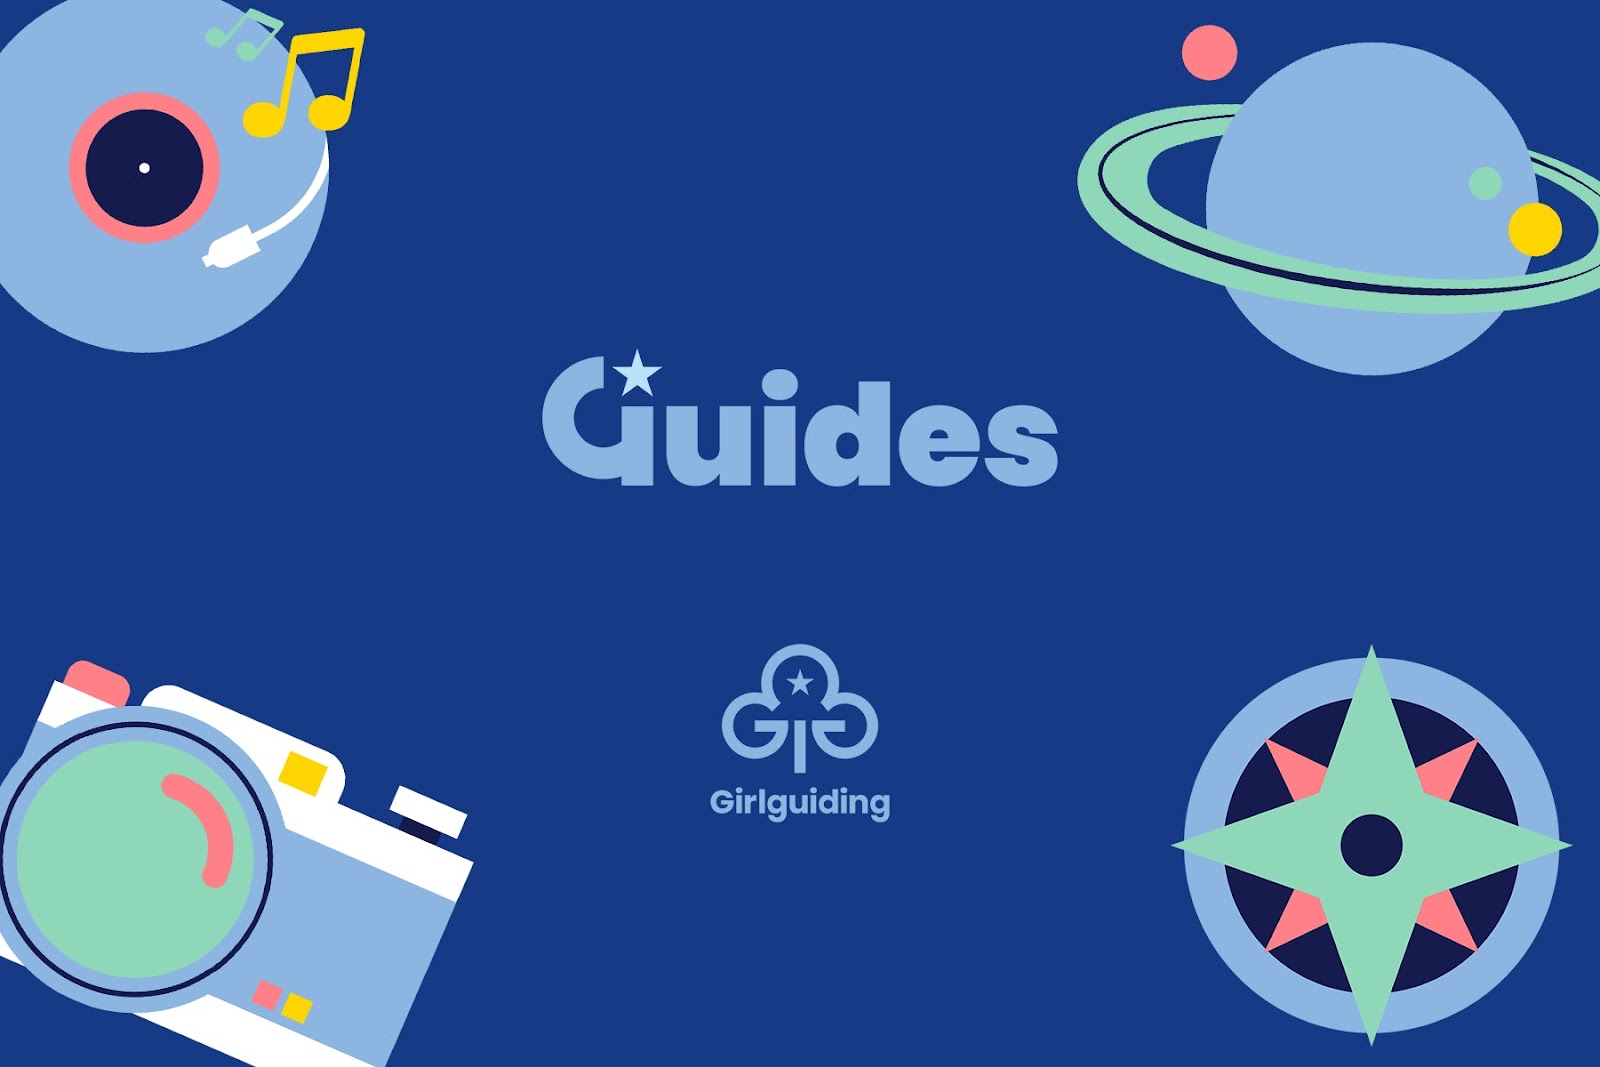 Graphic shows the new Guides branding, featuring a pale blue wordmark with a star attached to the 'G', on a dark blue background